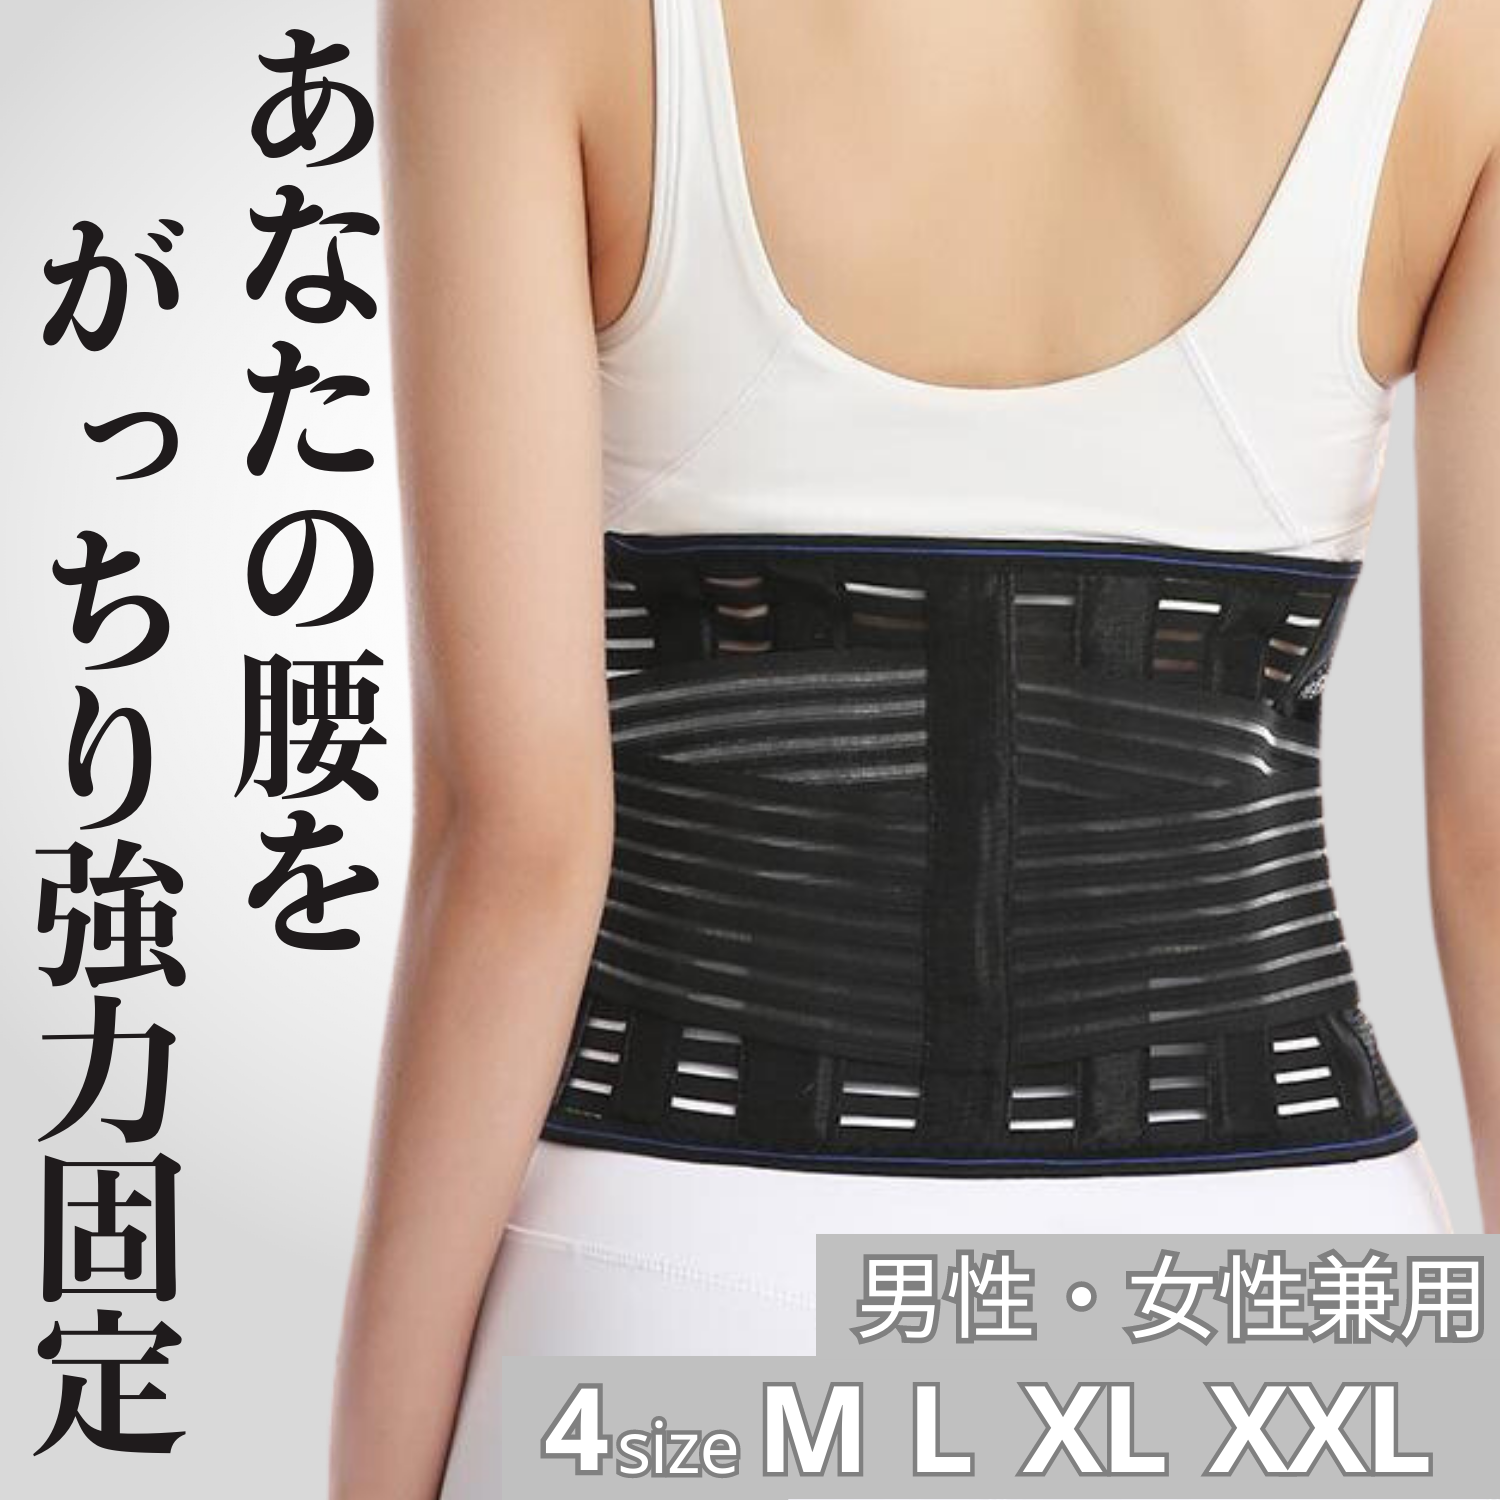  lumbago belt corset support improvement goods measures thin type ventilation large size light mesh supporter woman man small of the back .